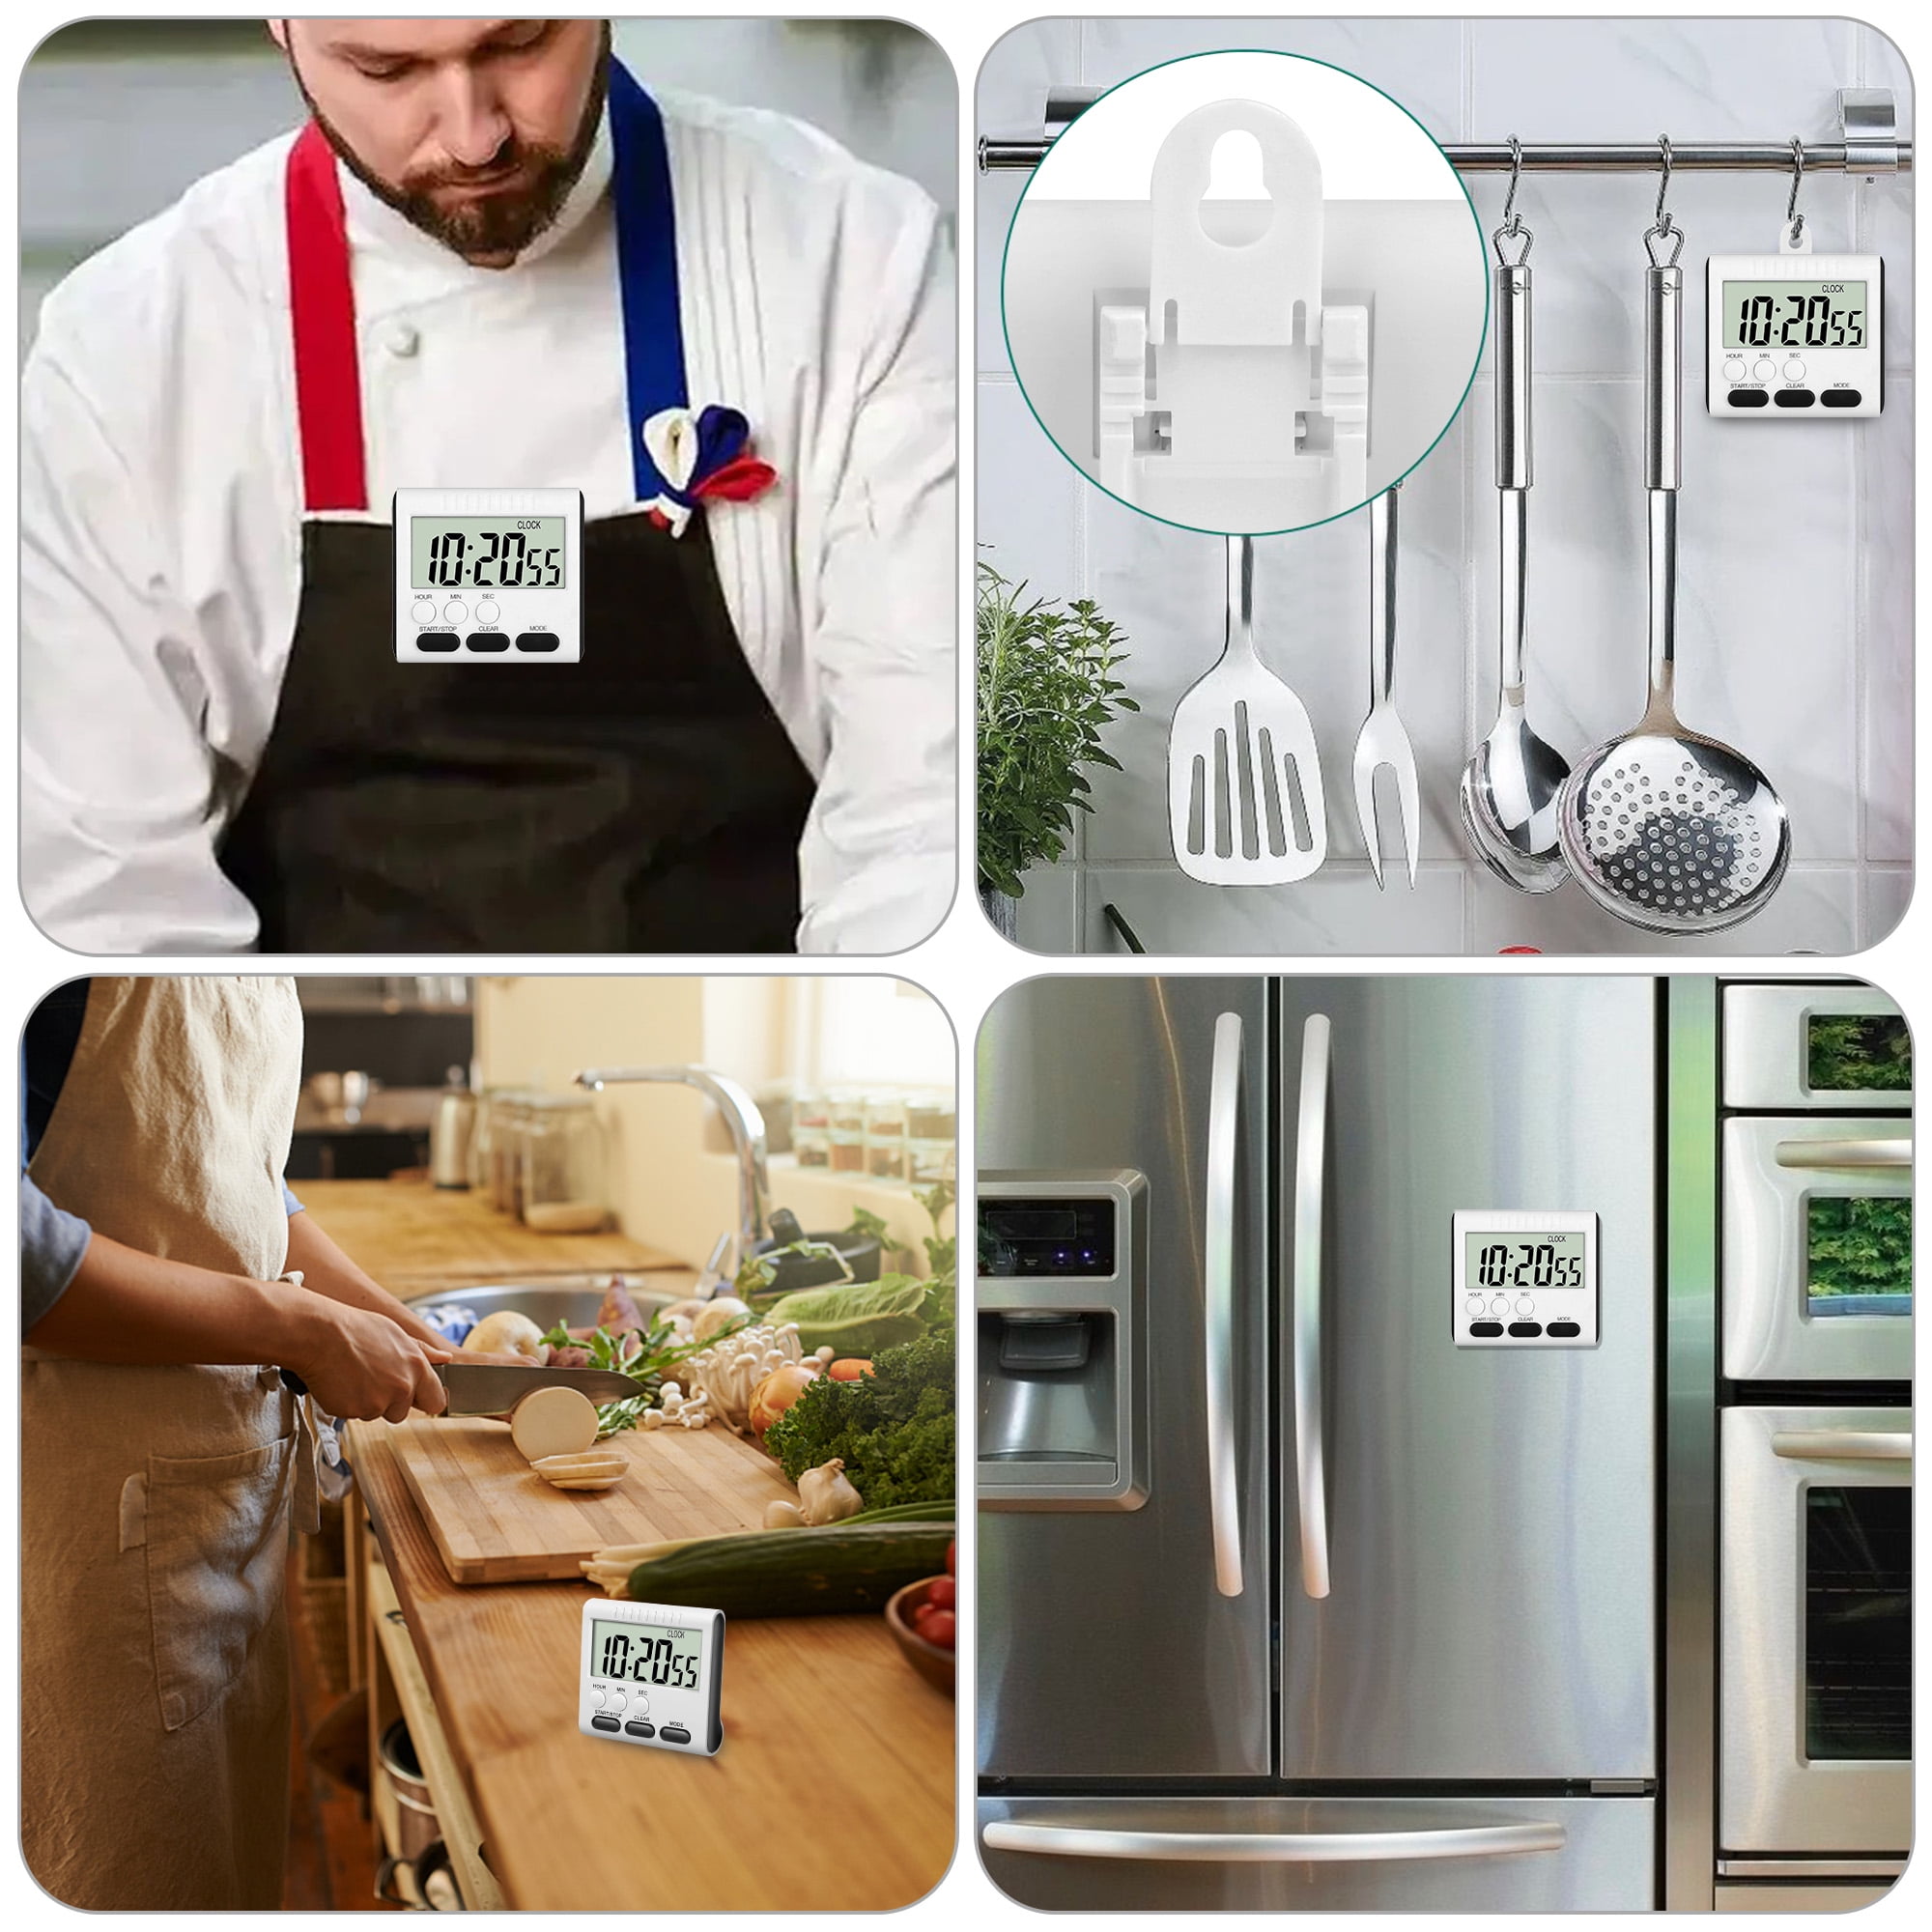 Toorise Kitchen Timers Magnetic Countdown Large LCD Display Digital Timer 3 in 1 Clock & Alarm Cooking Timer 24-hours Digital Timer Retractable Stand